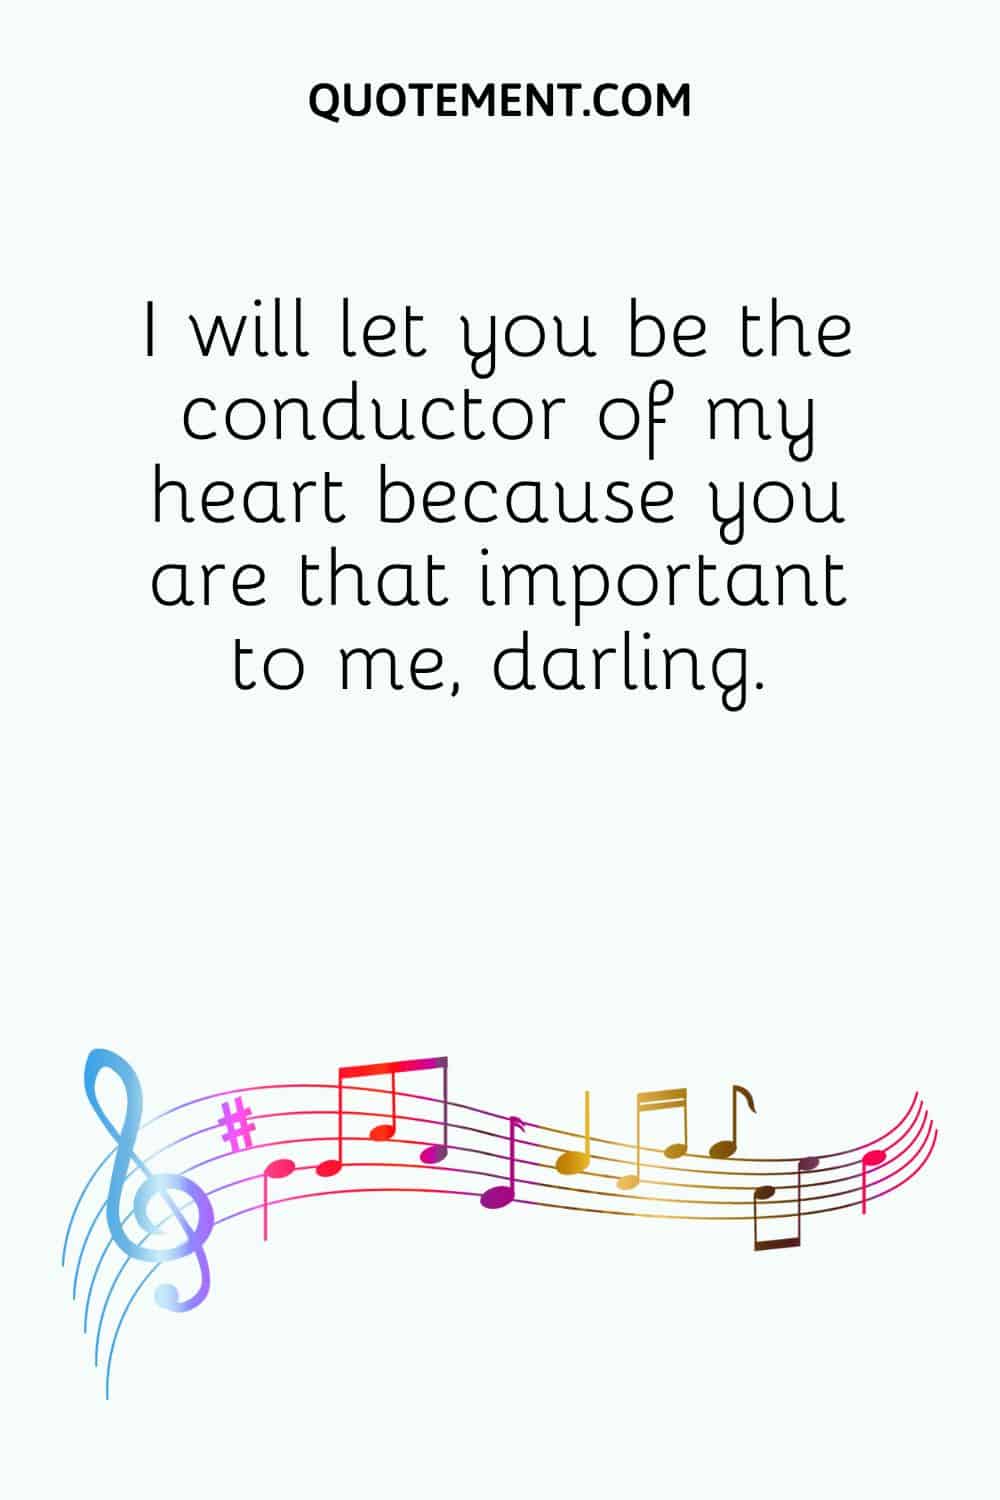 I will let you be the conductor of my heart because you are that important to me, darling